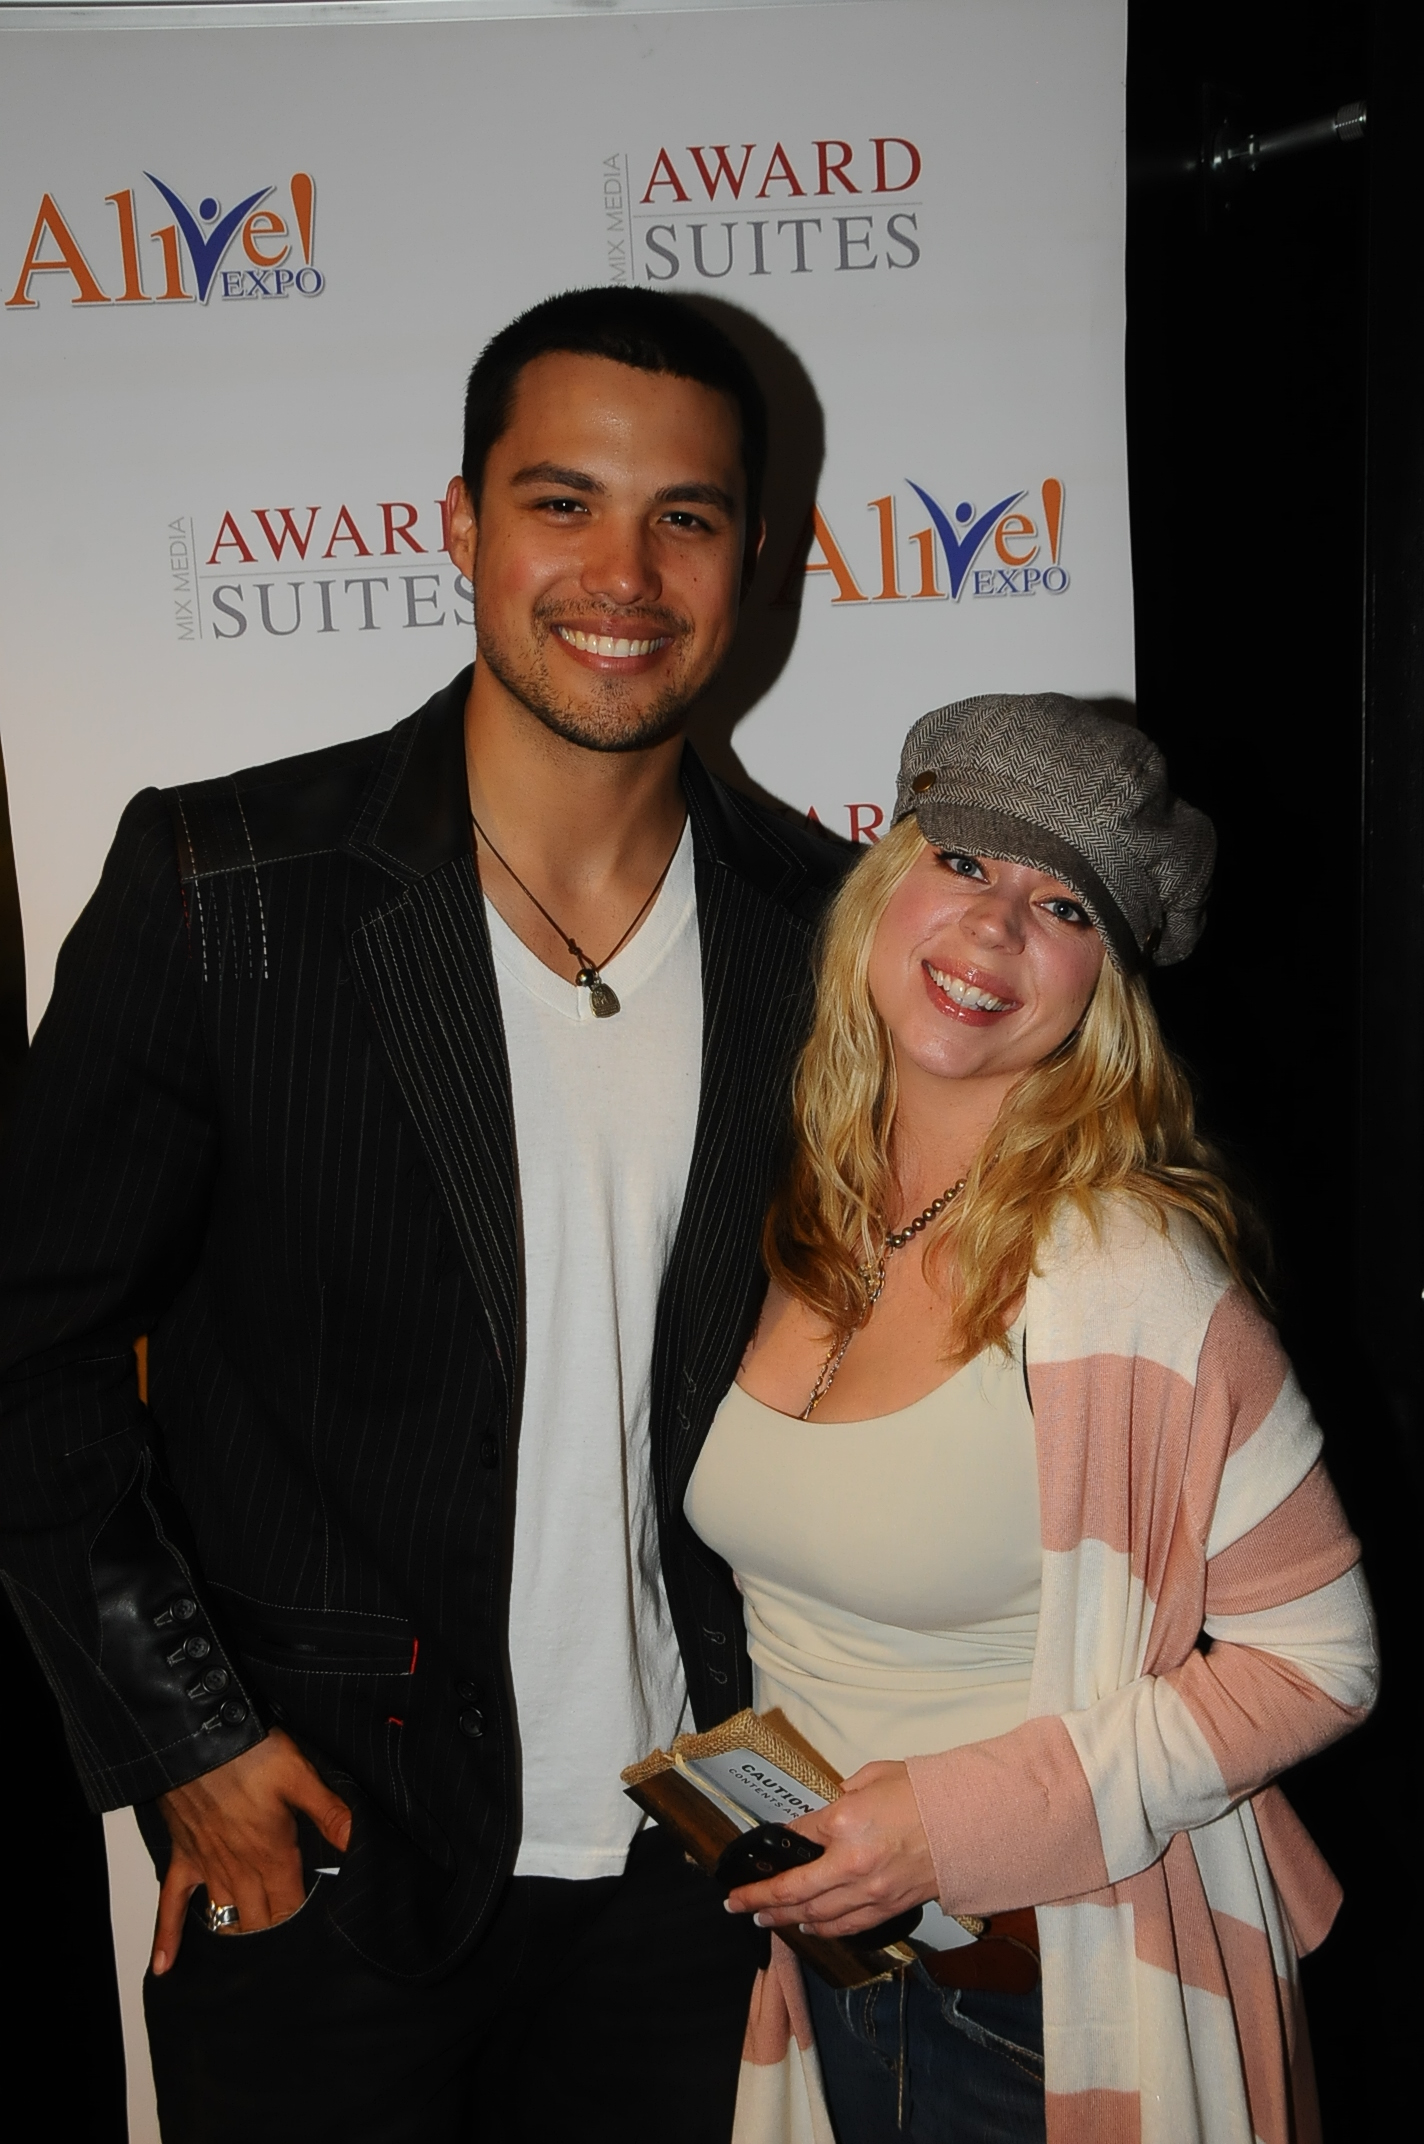 Actor Michael Copon and Executive Producer Heather R Holliday